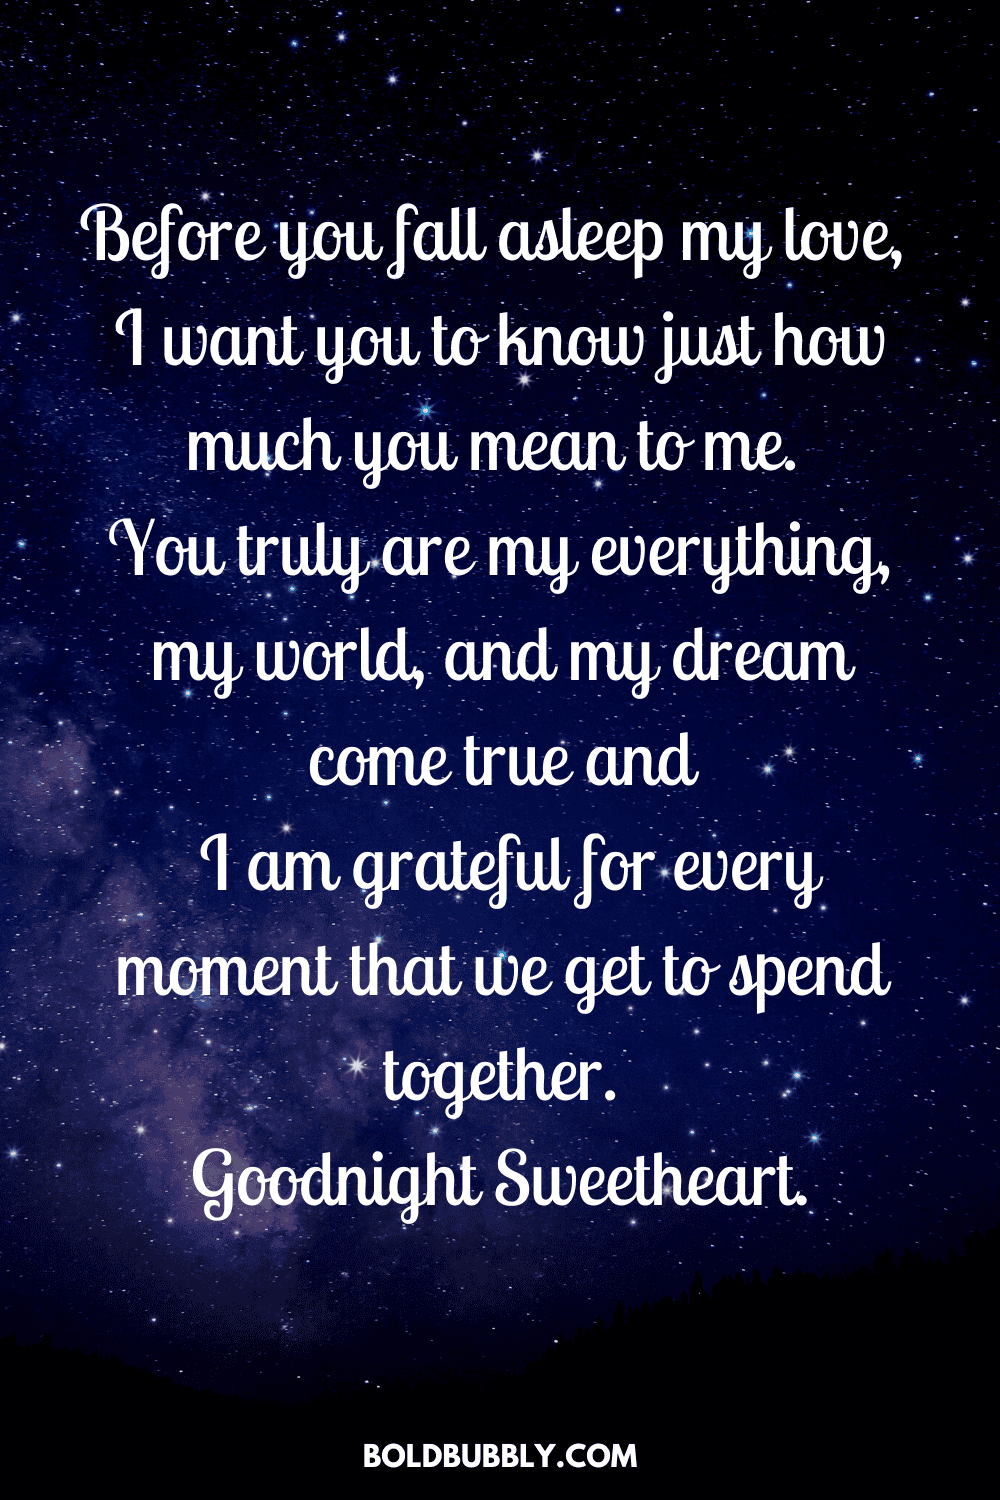 100+Romantic Long Goodnight Messages For Her - Bold & Bubbly